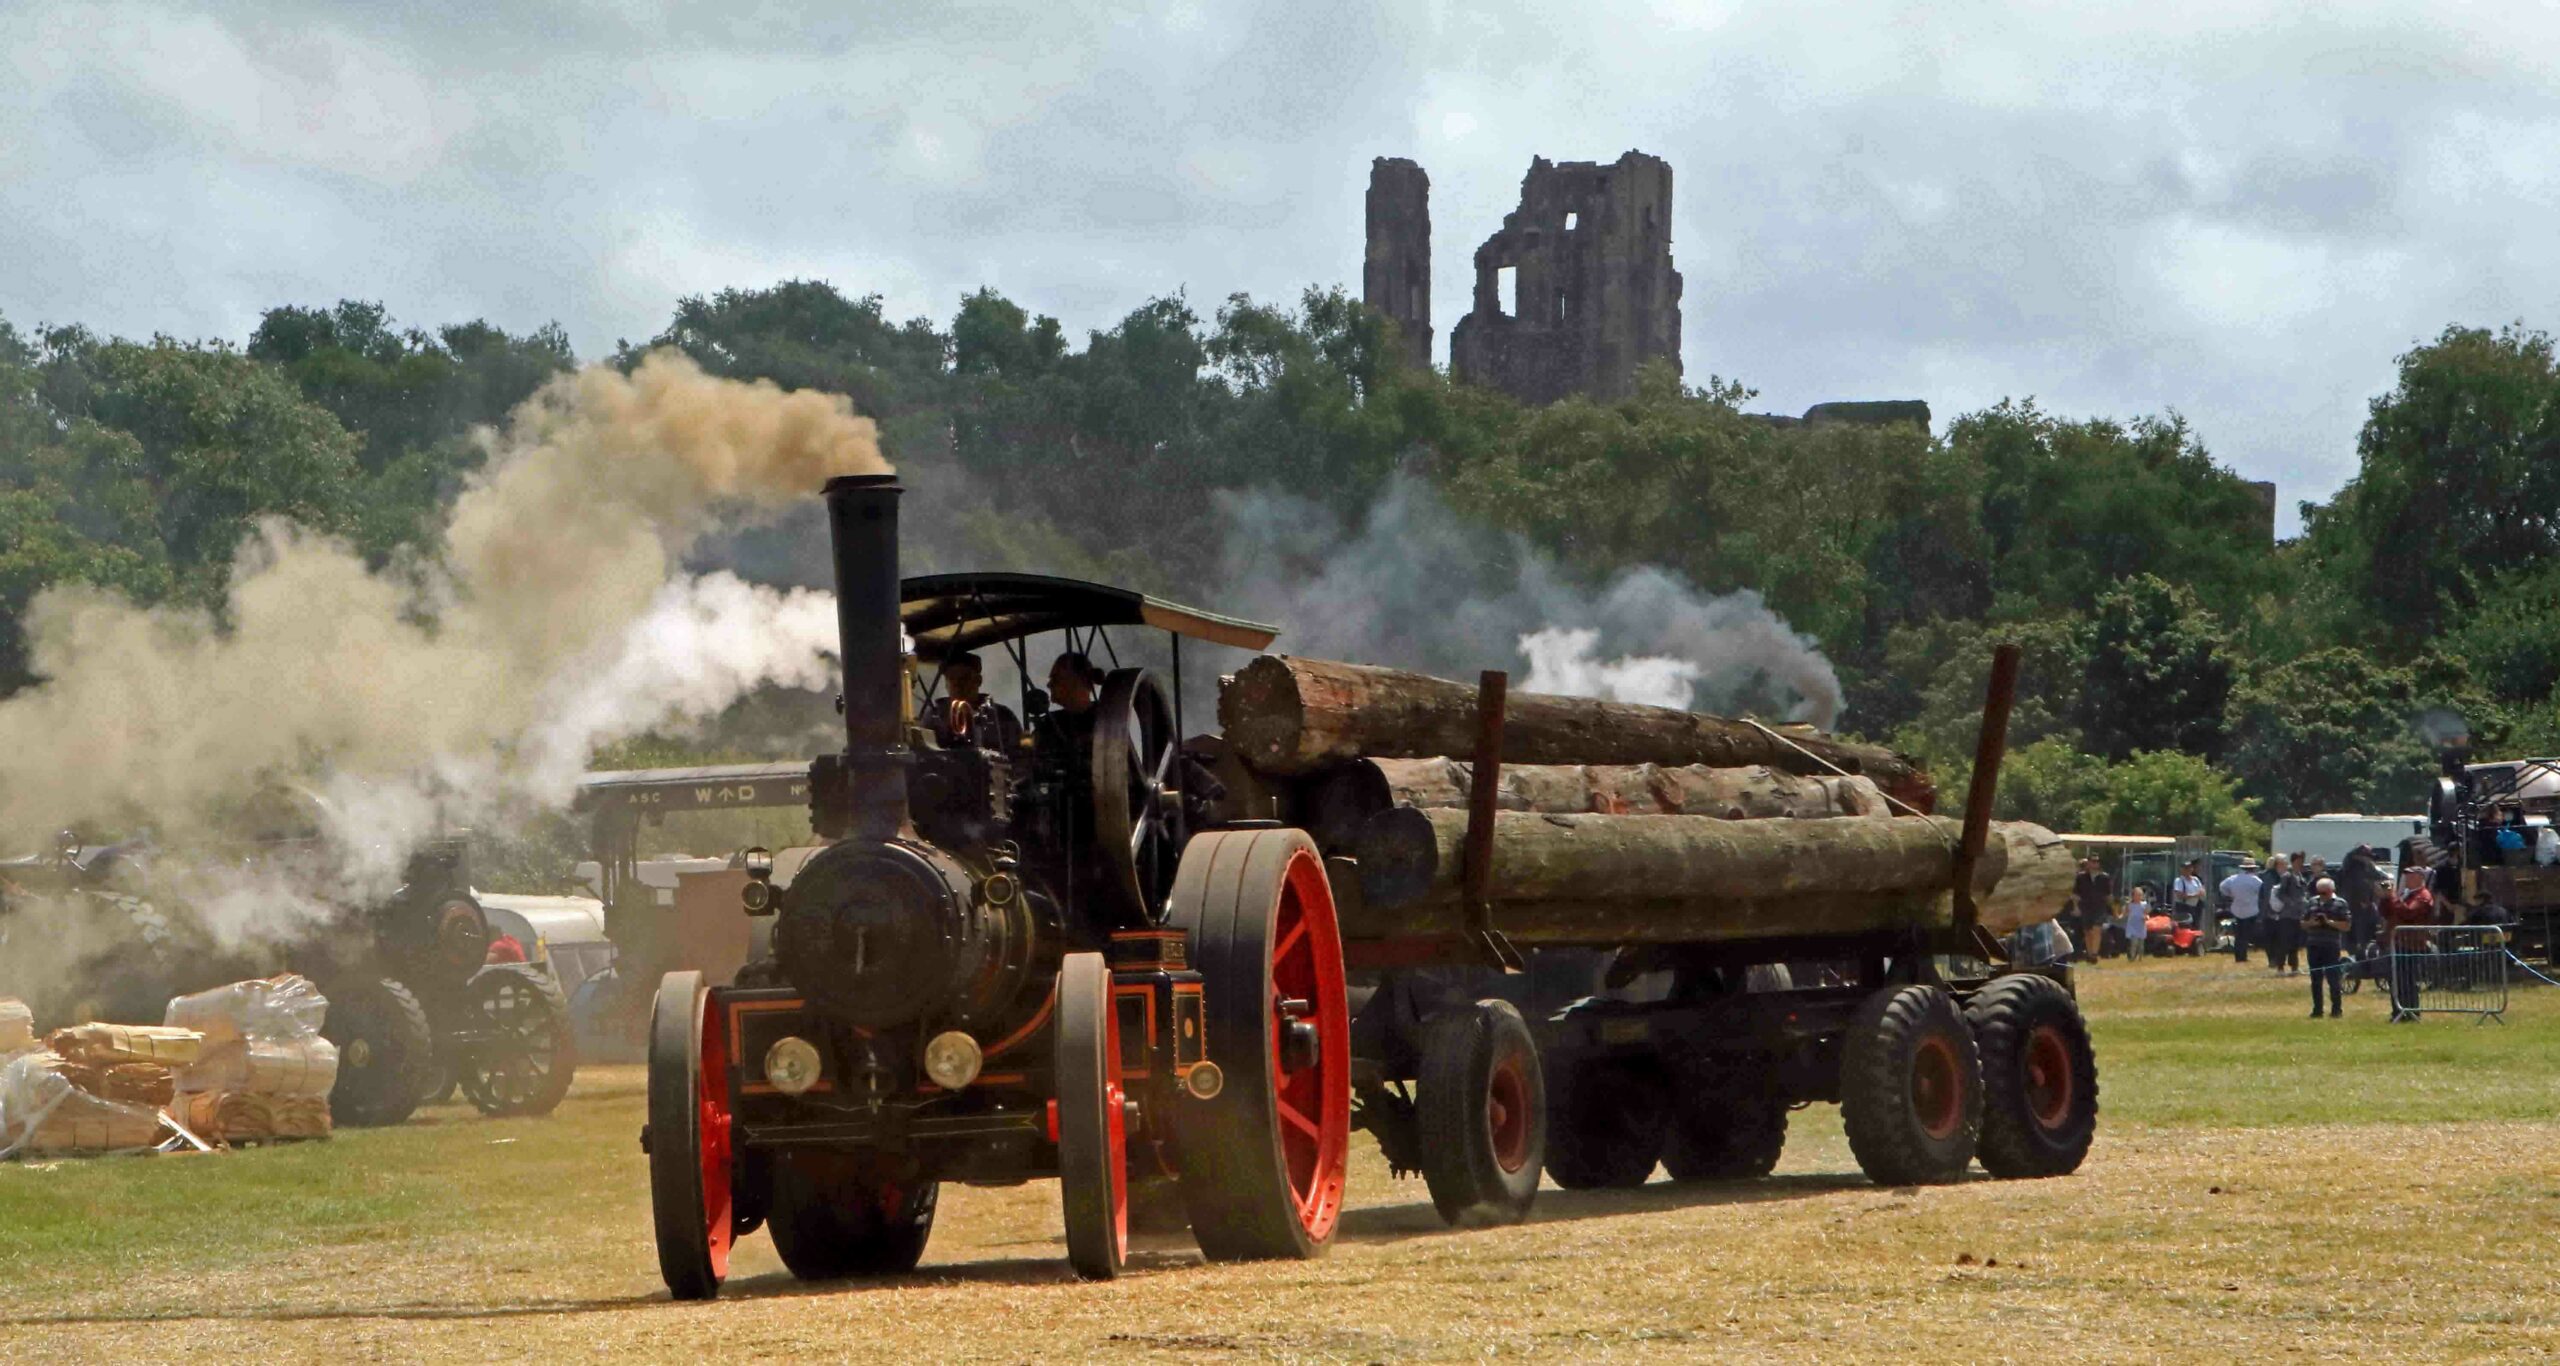 Everything you need to know about Great Dorset Steam Fair - What's on,  tickets, camping, and where to park - Dorset Live